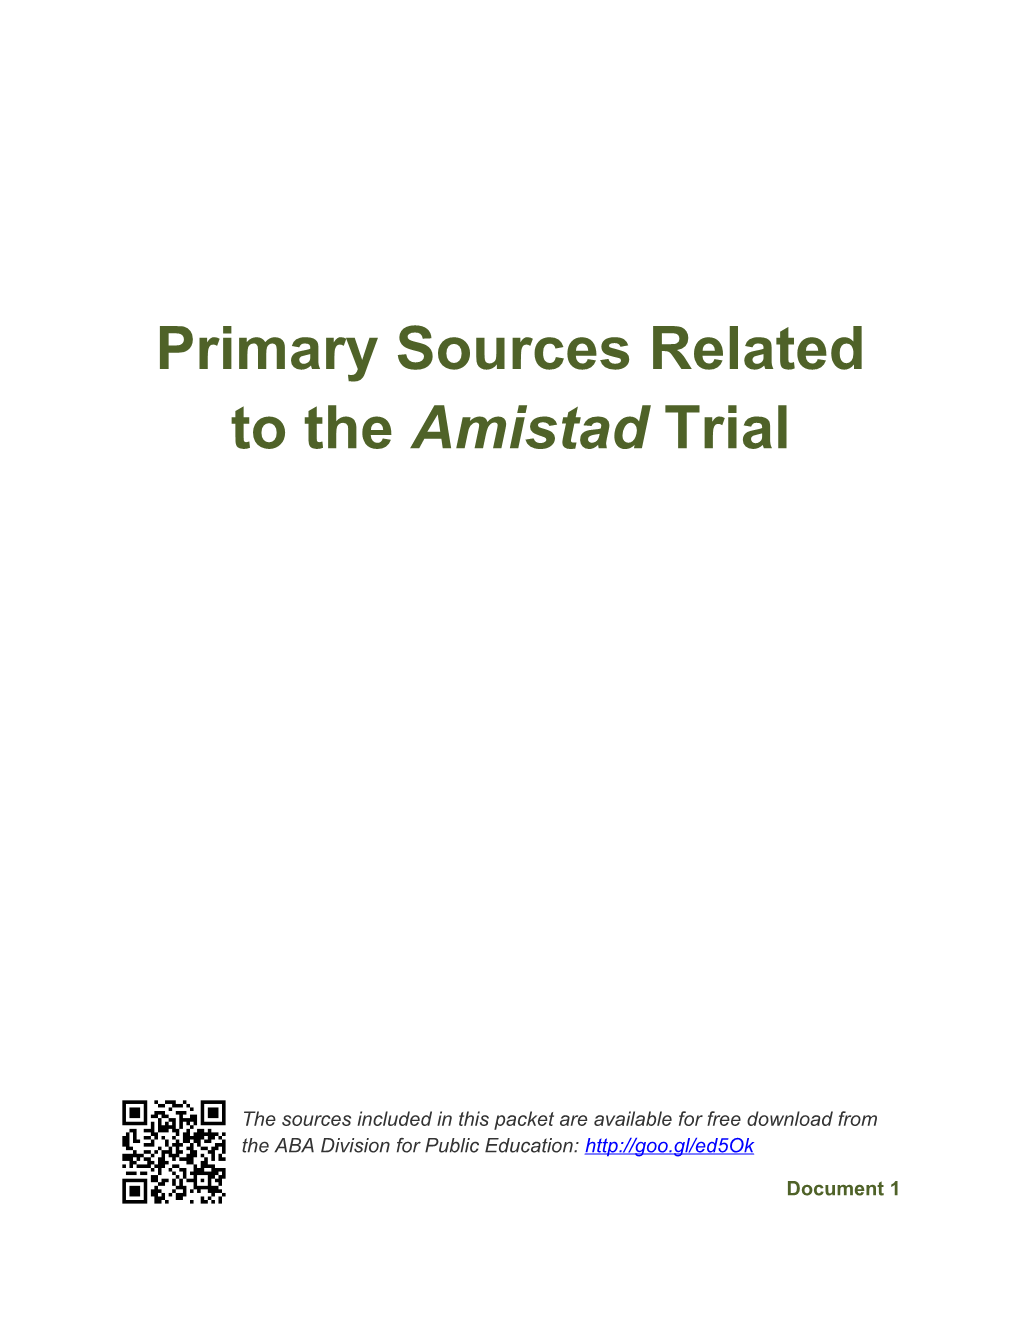 Primary Sources Related to the Amistad Trial